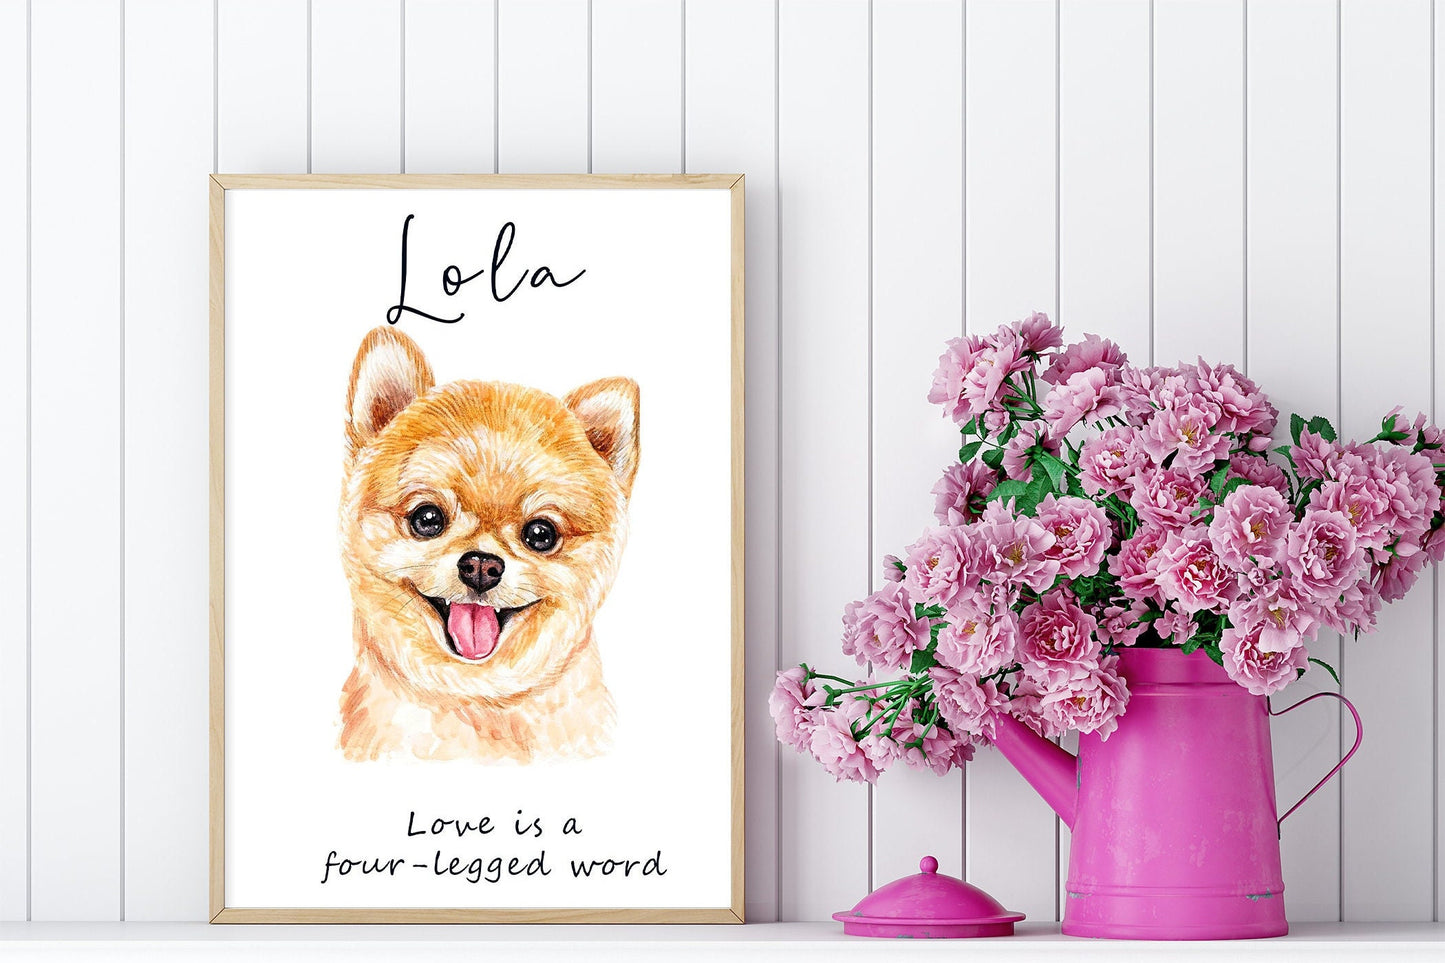 Pomeranian dog wall art - Charming dog portrait for animal lovers with custom funny or heart warming message | A4 | A5 | Greeting card